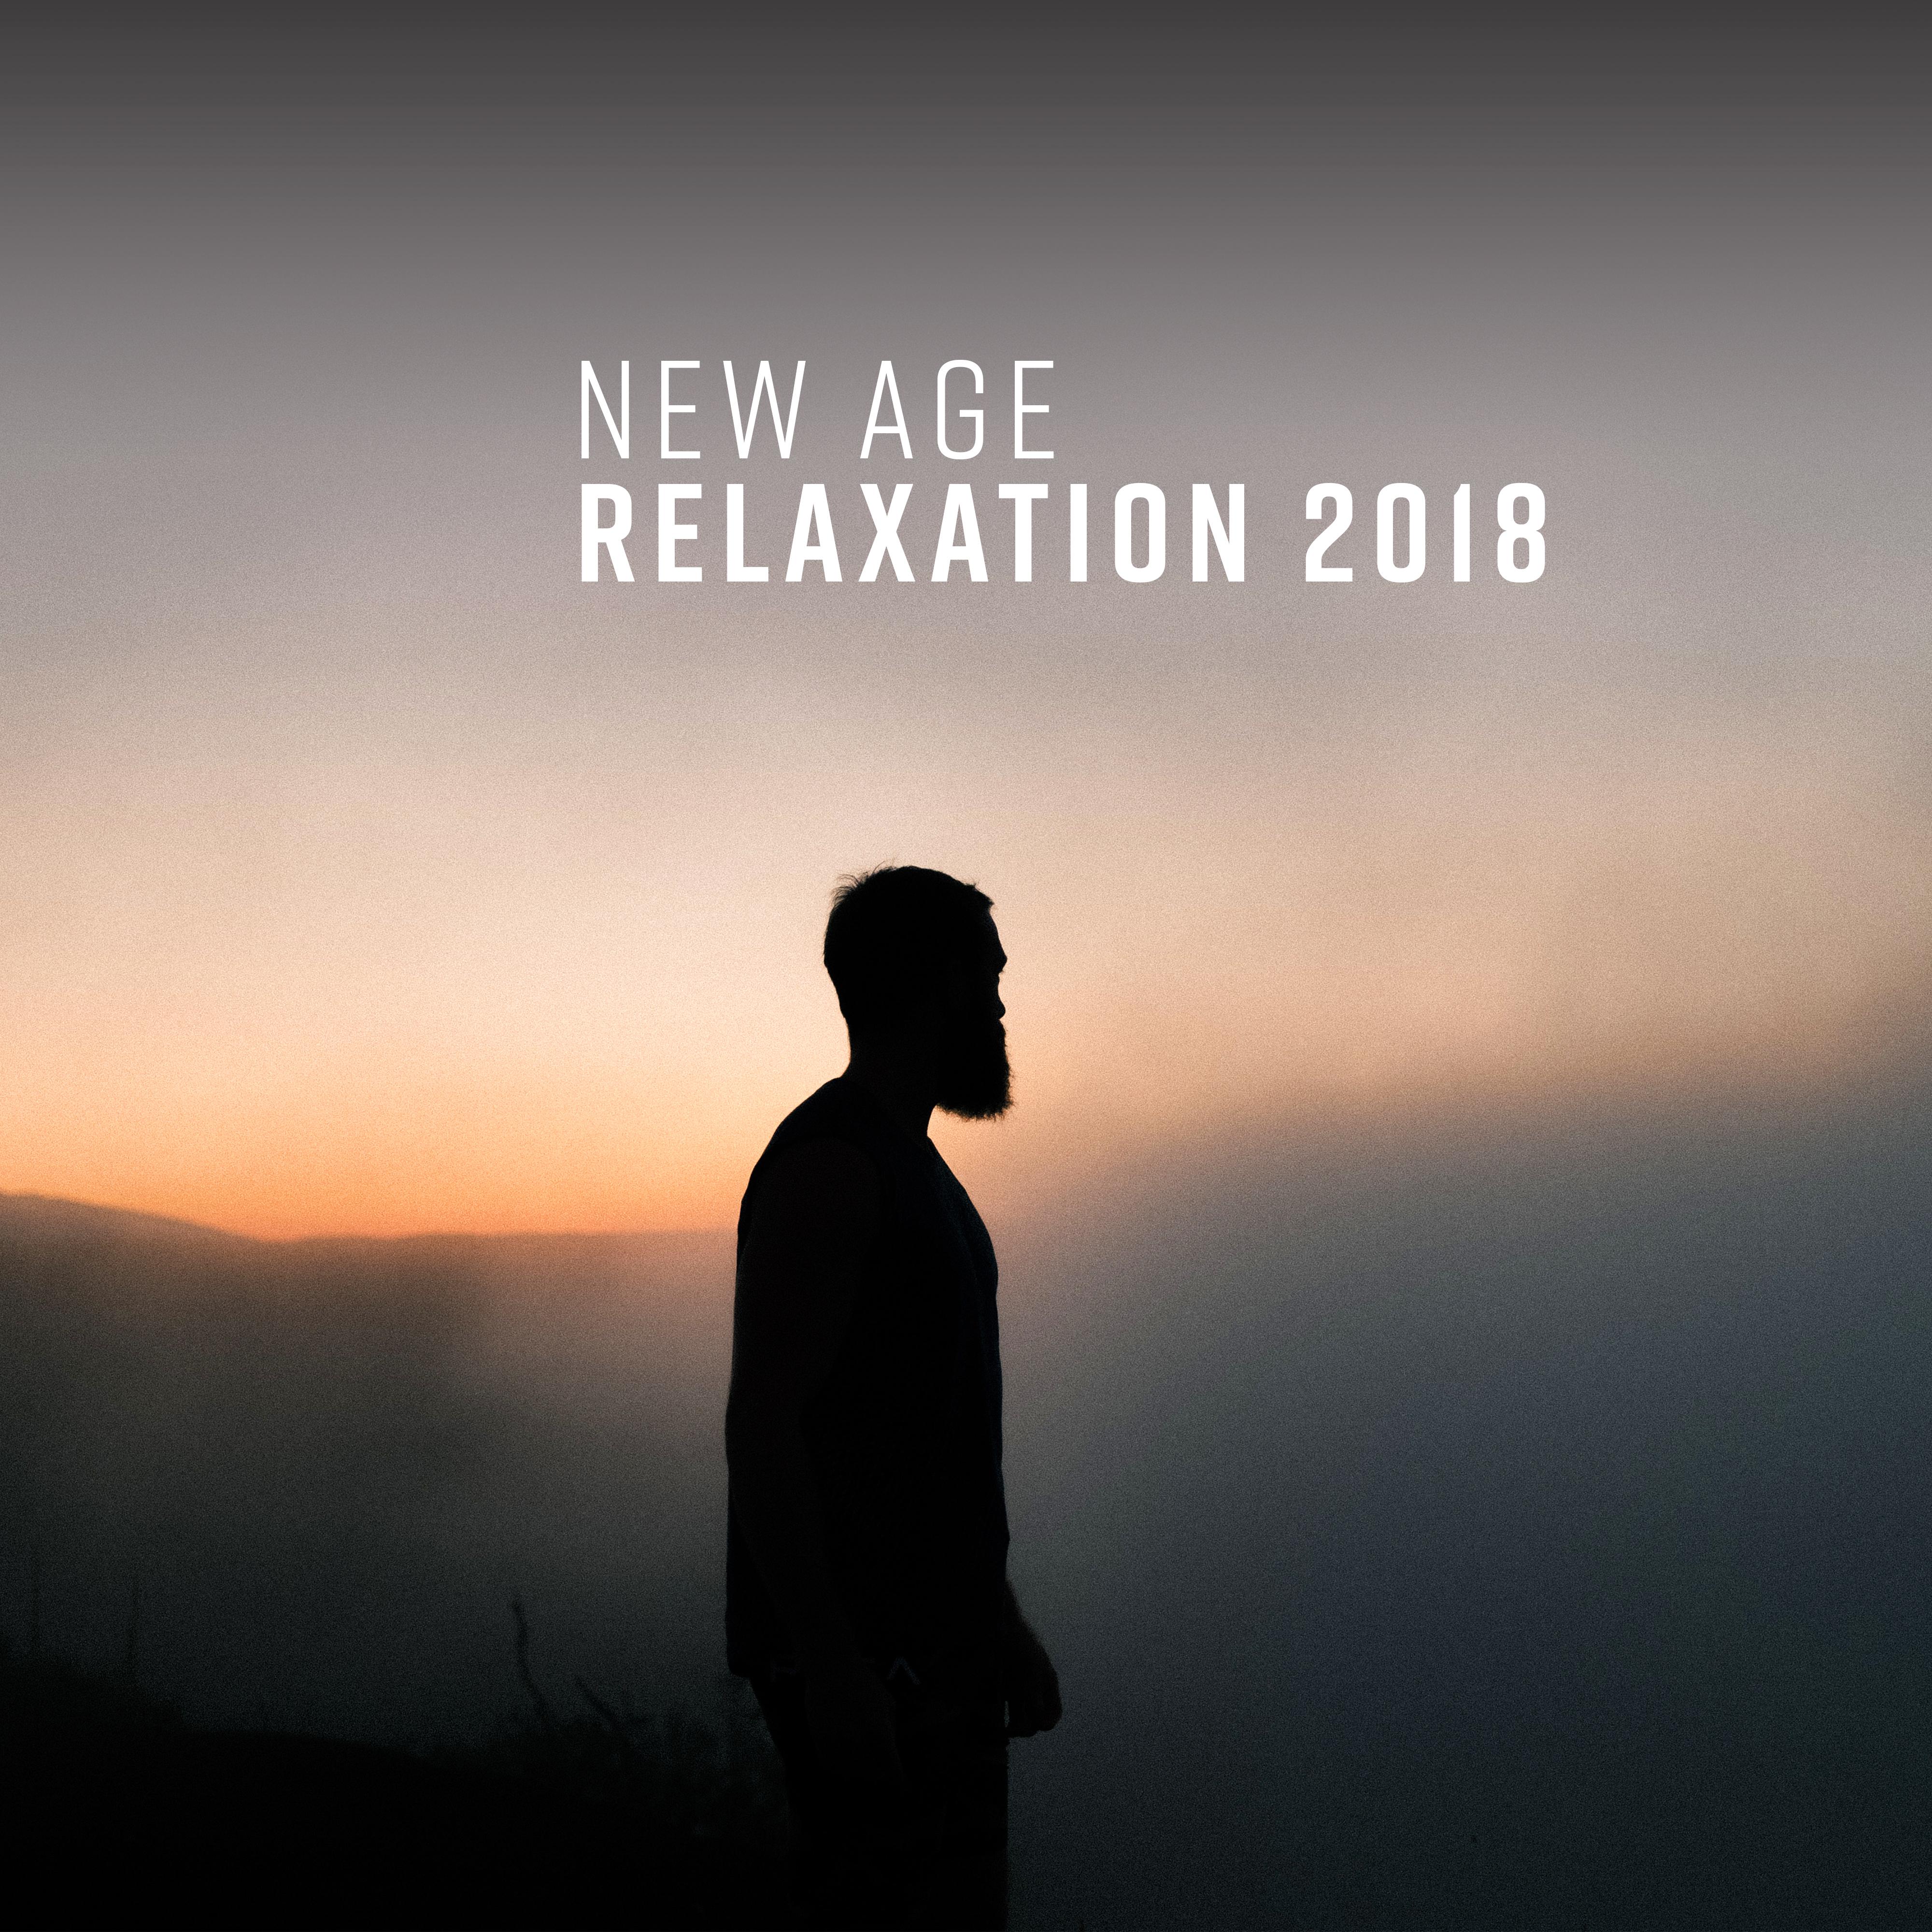 New Age Relaxation 2018